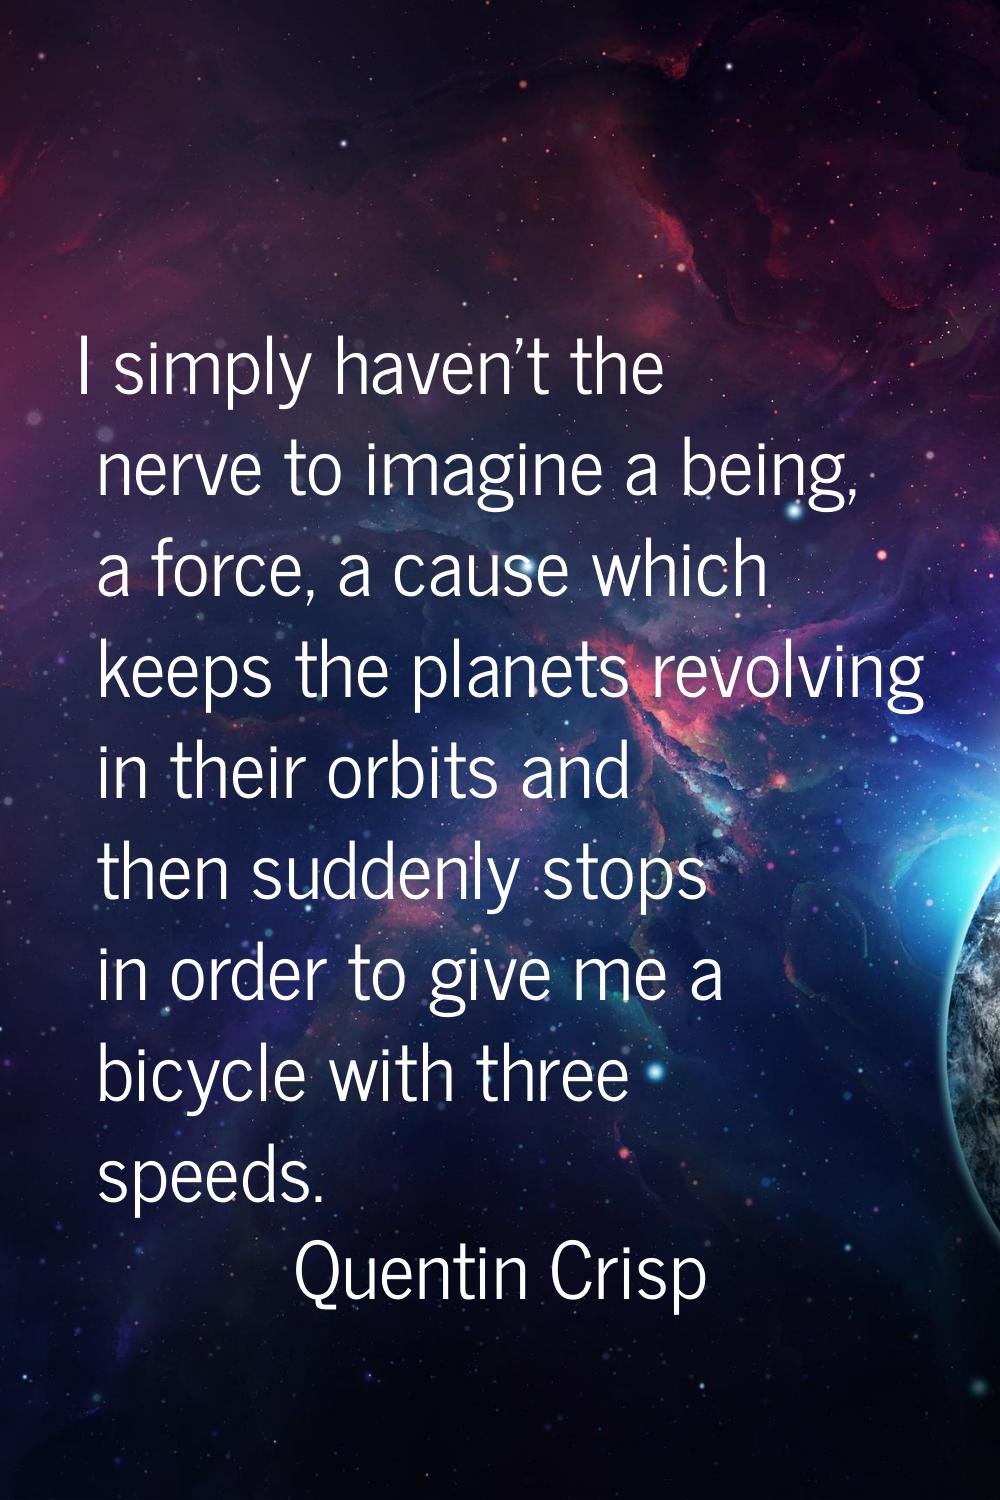 I simply haven't the nerve to imagine a being, a force, a cause which keeps the planets revolving i